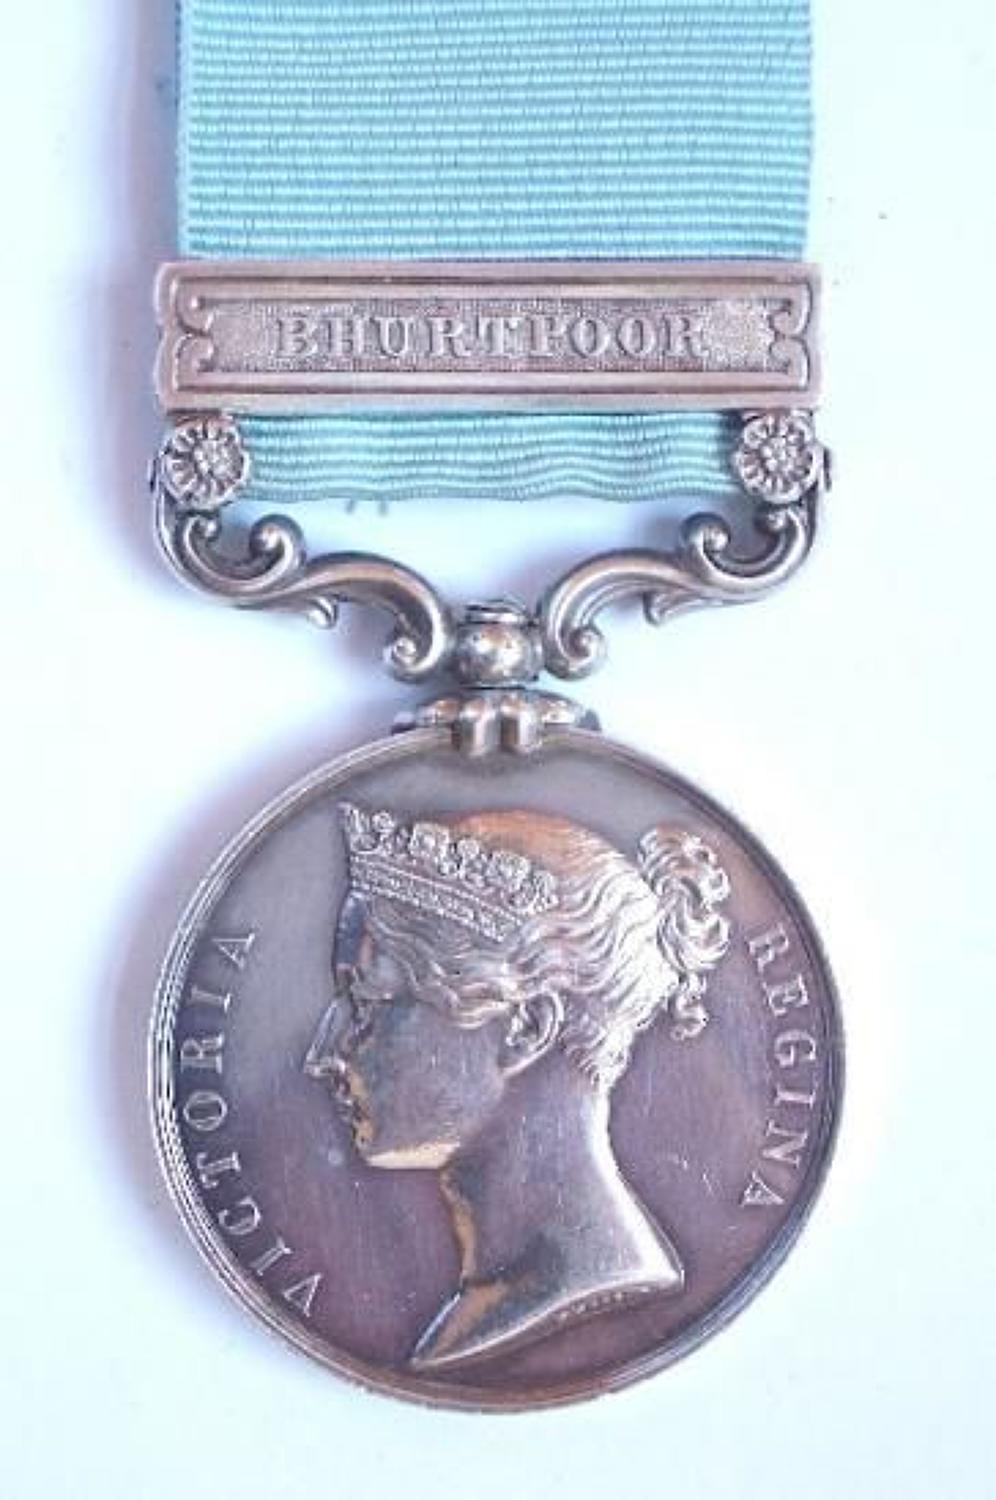 Army of India Medal 1799-1826, clasp  Bhurtpoor to 14th Foot.